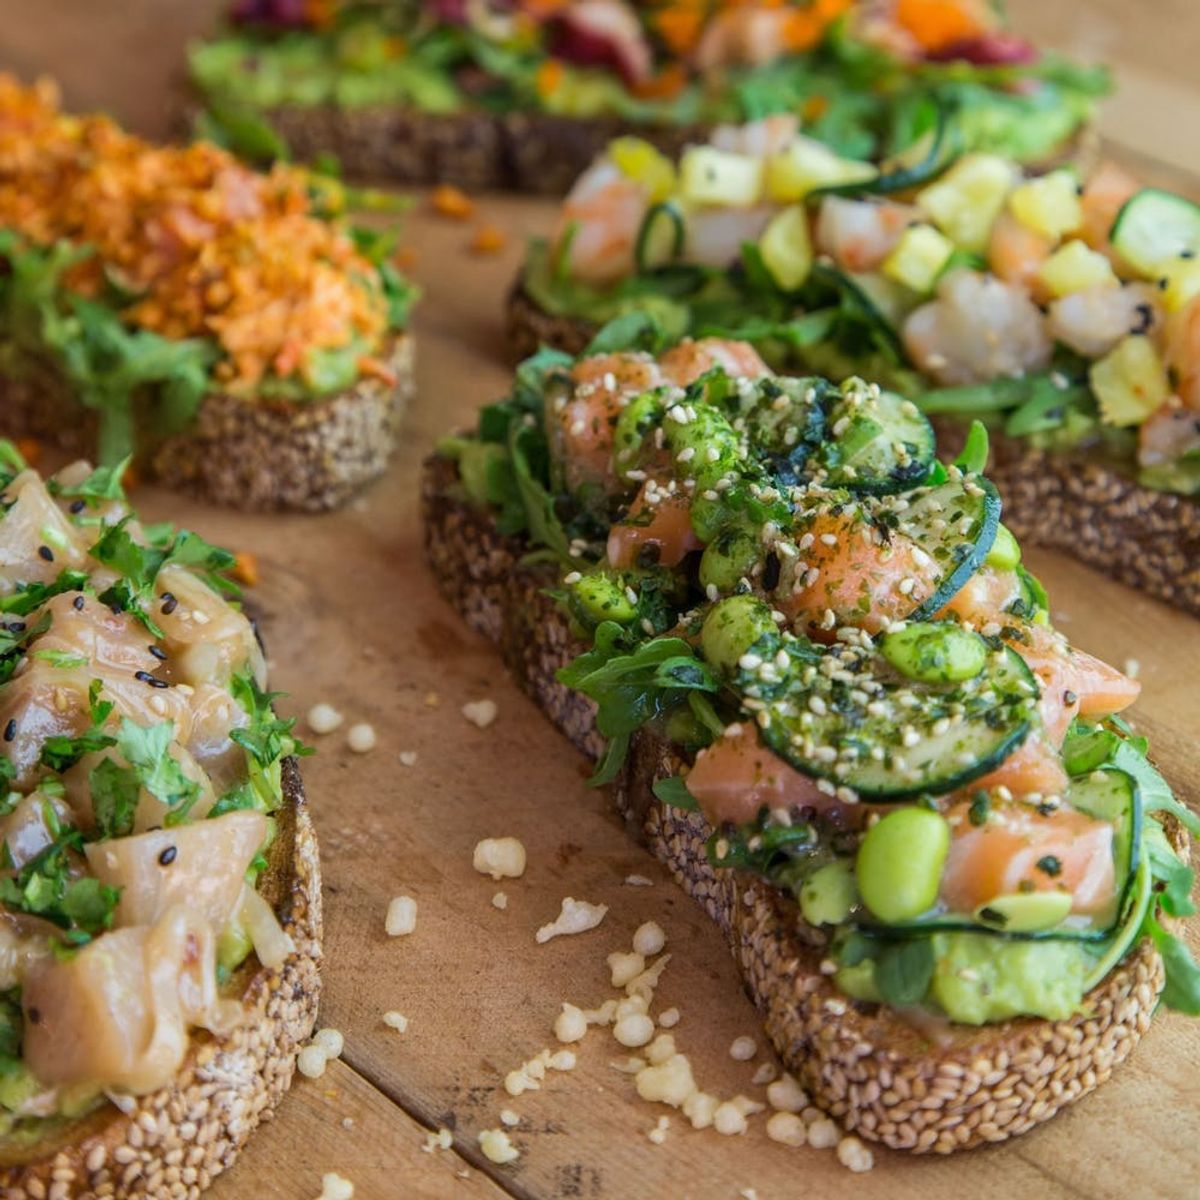 All Food Trends Collide in Pokecado Toast, And We Have *The Best* Recipe